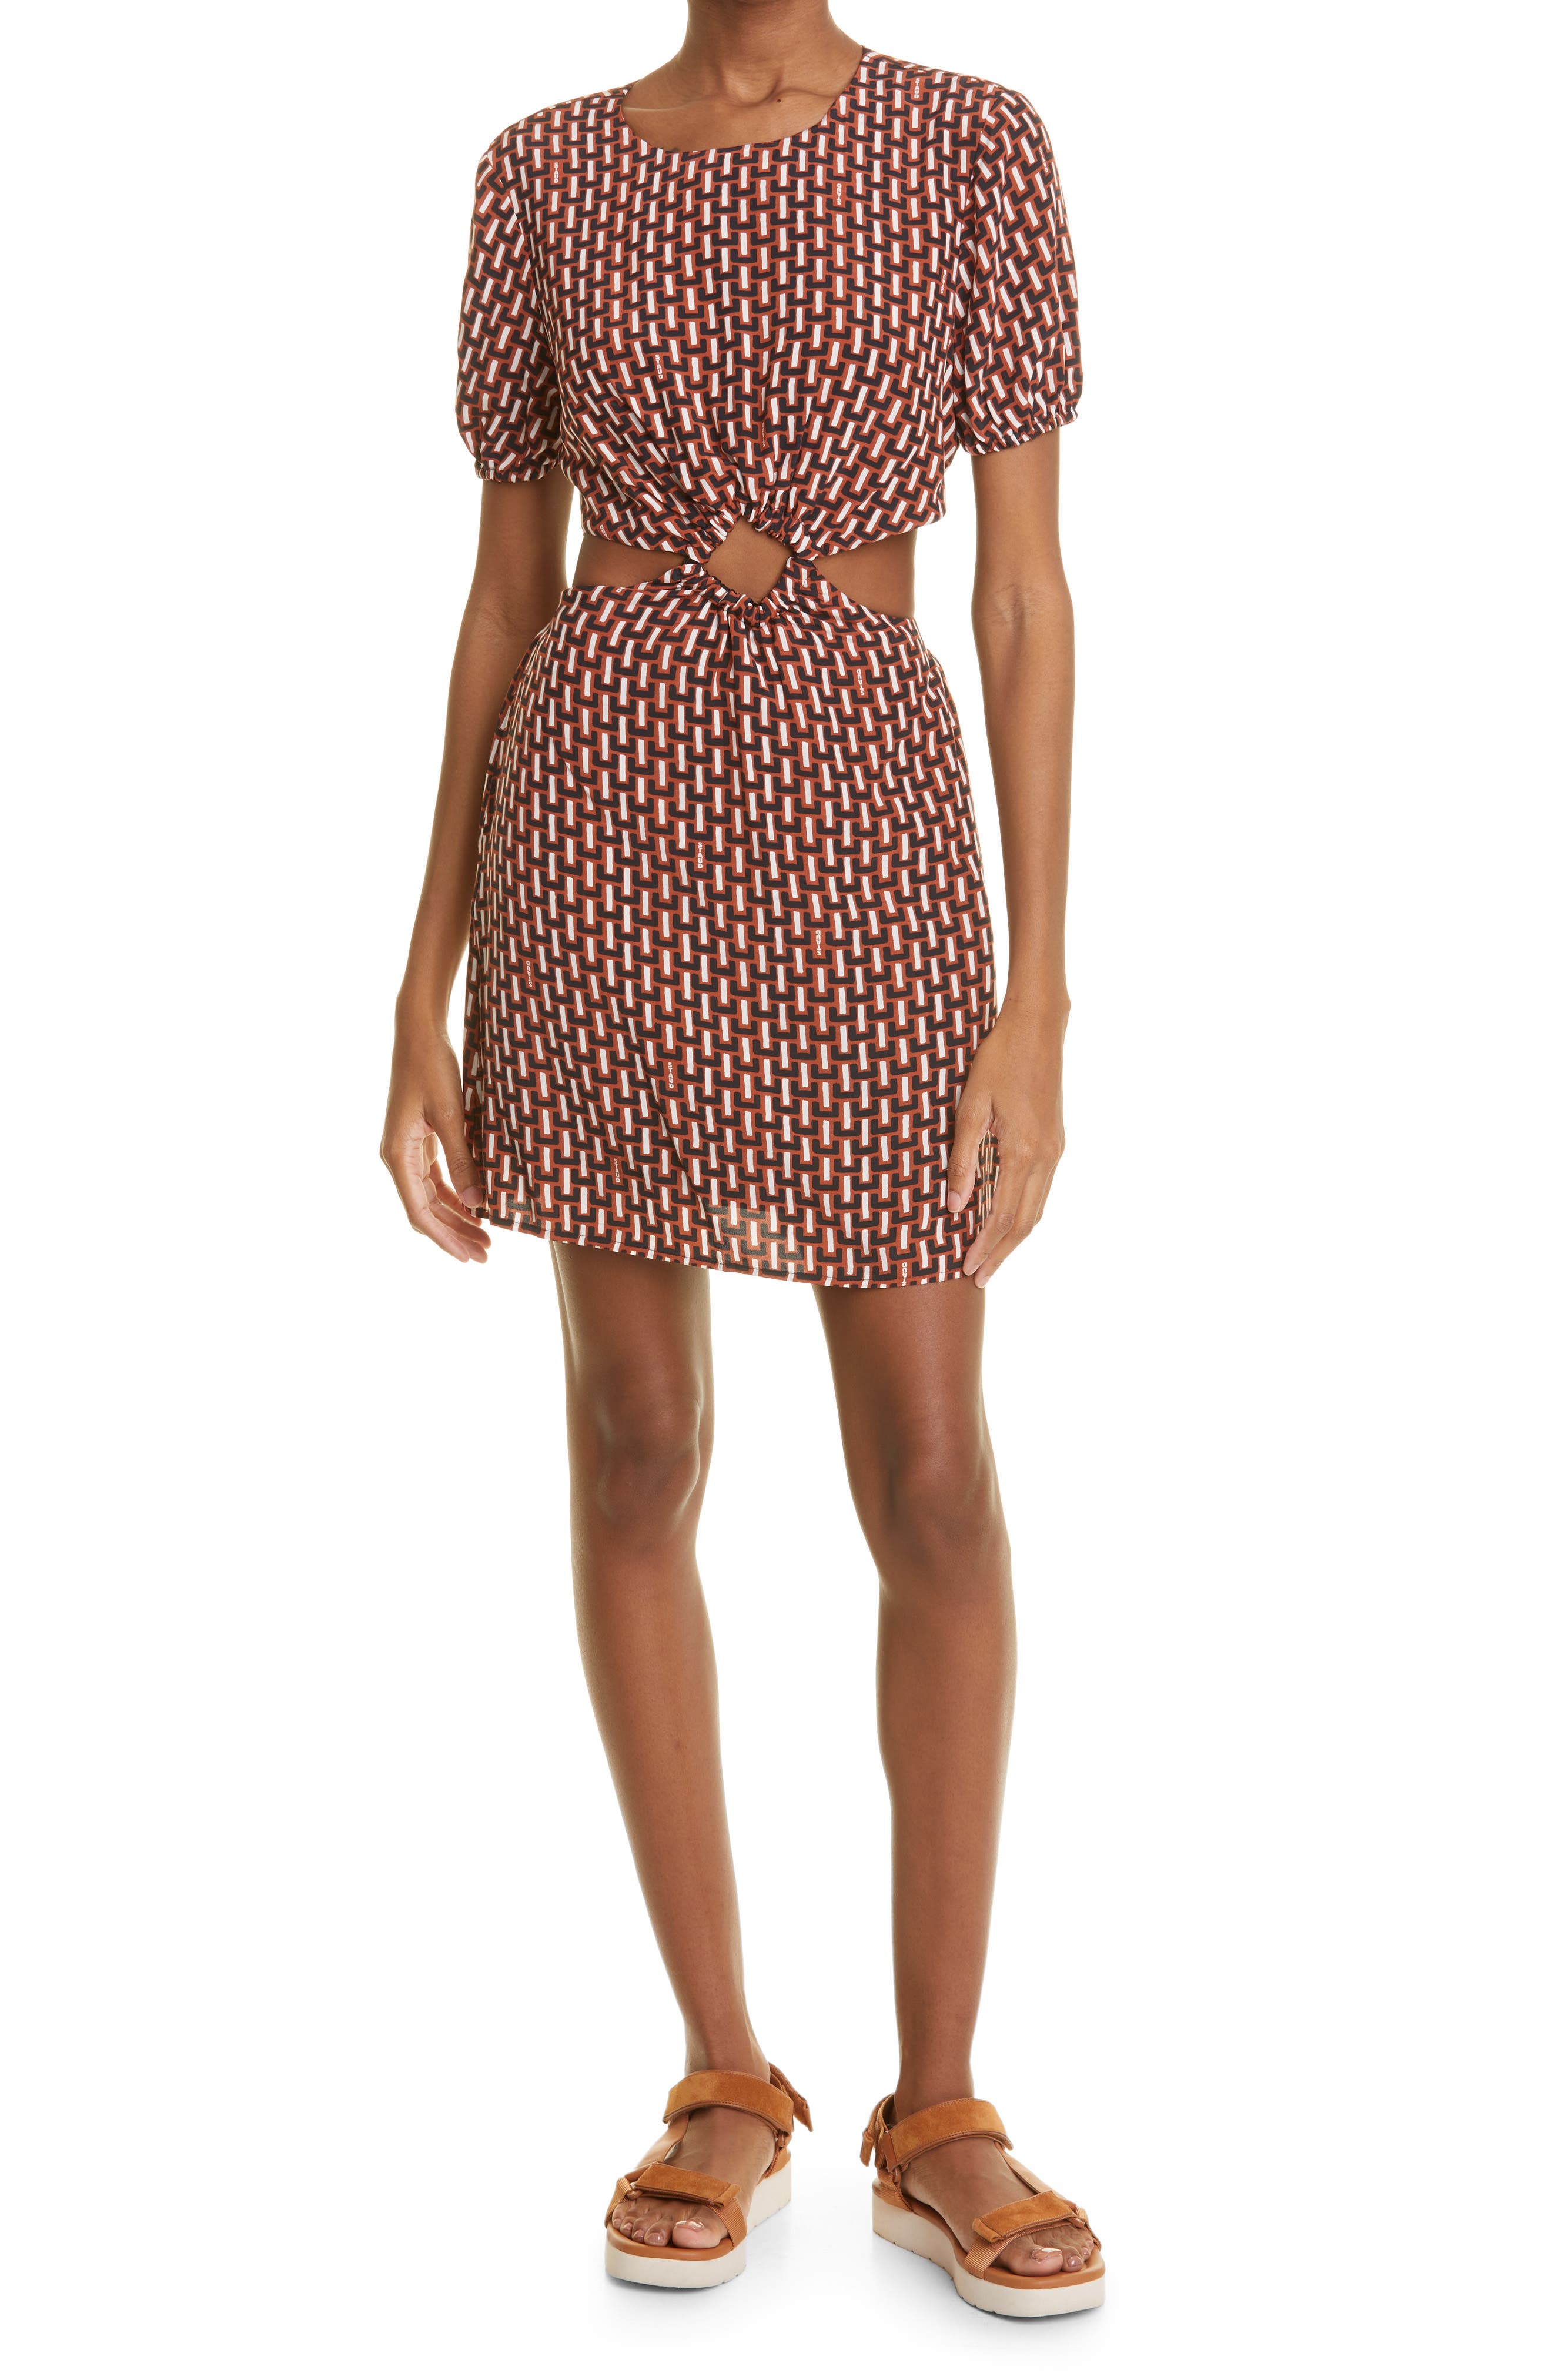 STAUD Epona Geometric Print Cutout Dress in Basket Weave at Nordstrom, Size X-Small